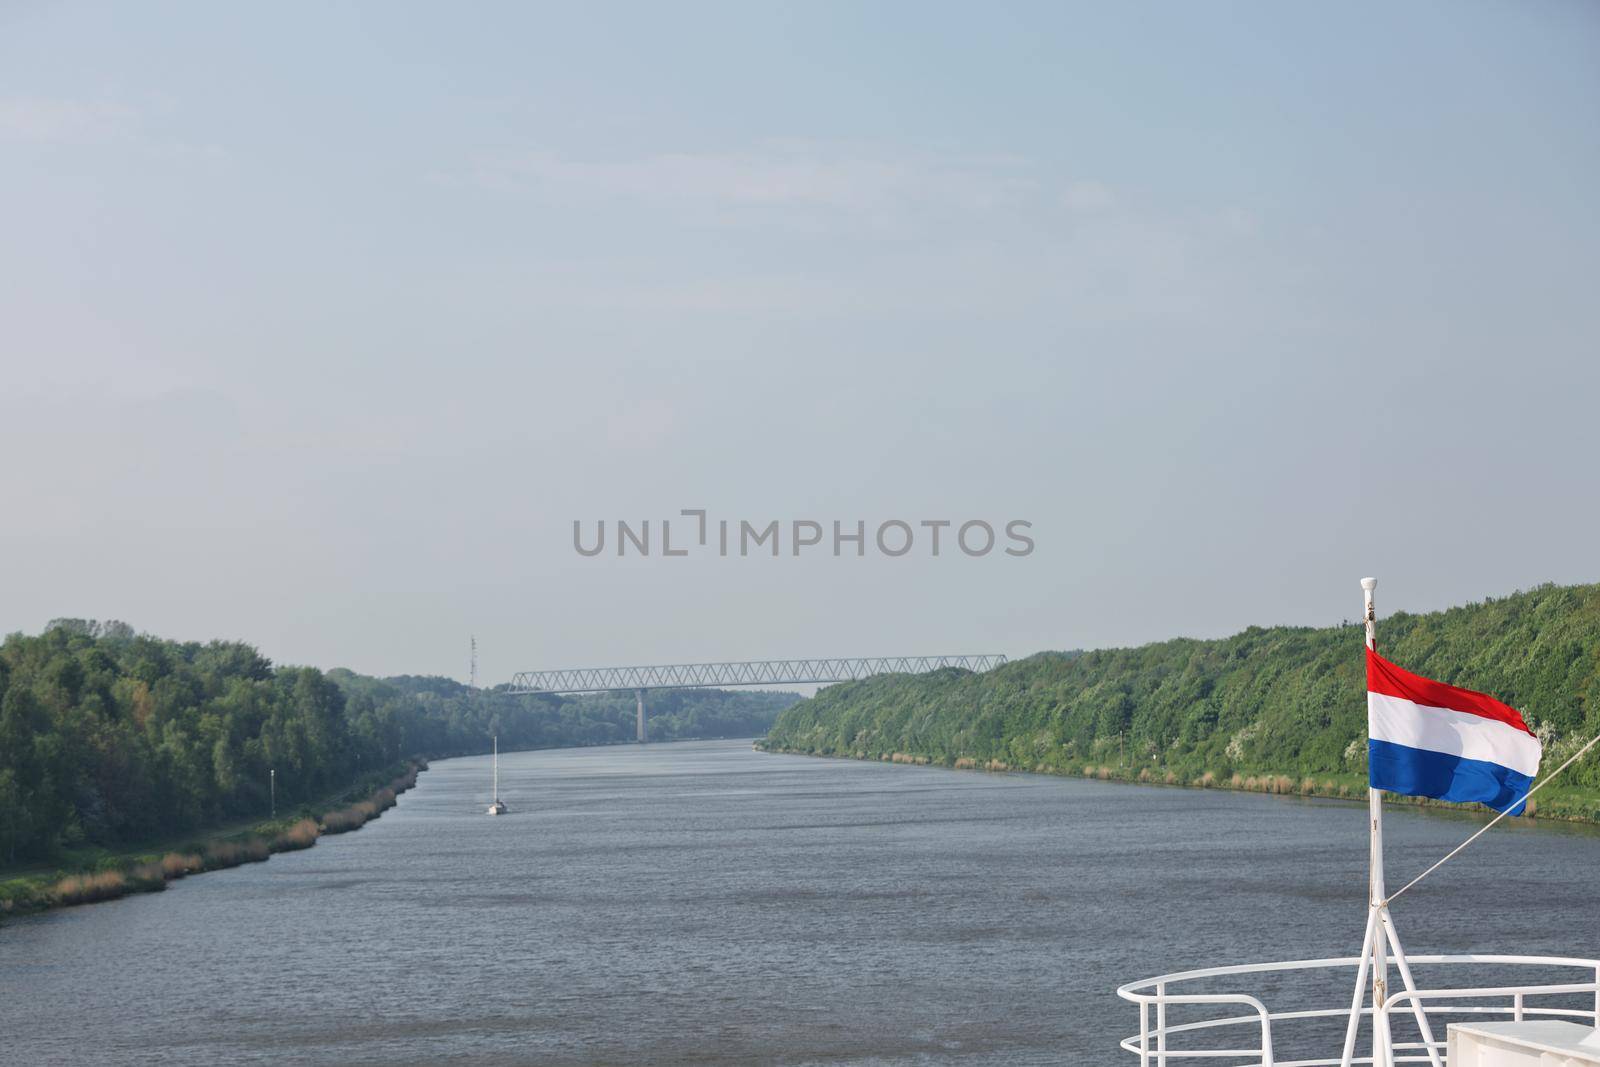 Cruise ship sailing through Kiel canal in Germany. The Kiel Canal goes through the middle of Schleswig-Holstein and it is 98 km long.